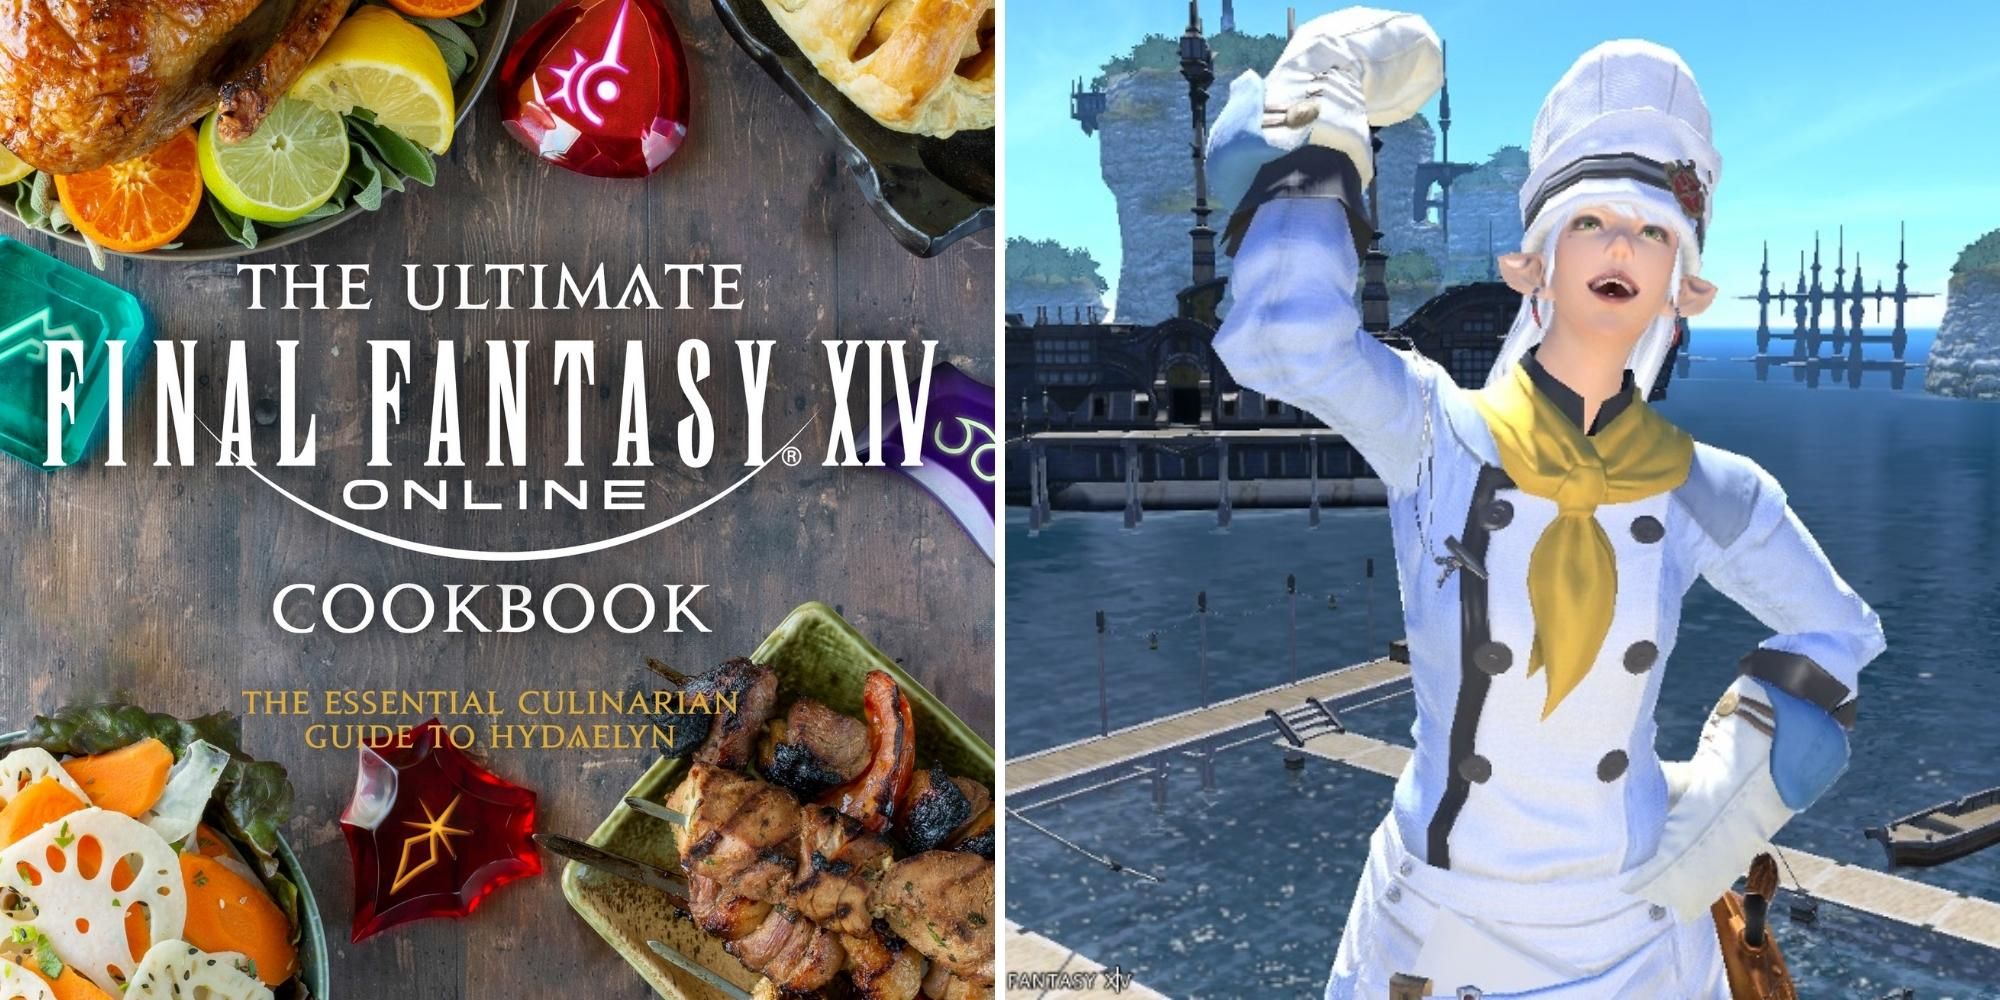 Ultimate Final Fantasy 14 Cookbook and Culinarian character from the game